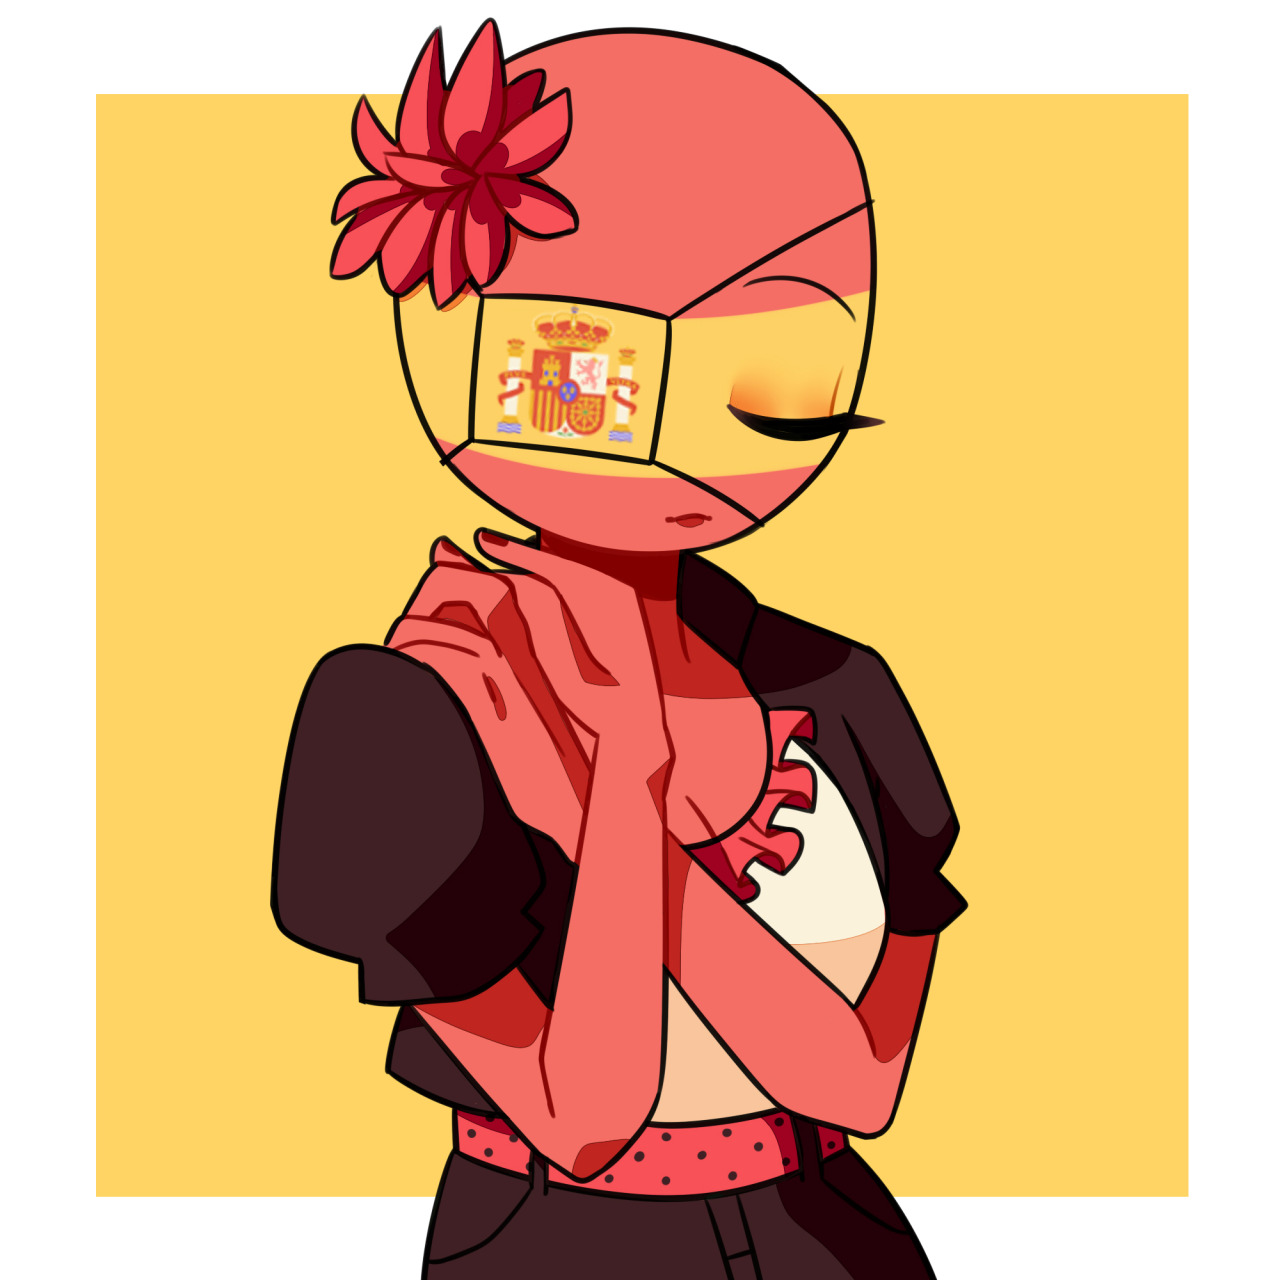 Countryhumans by Countryhumans24 - Pixilart